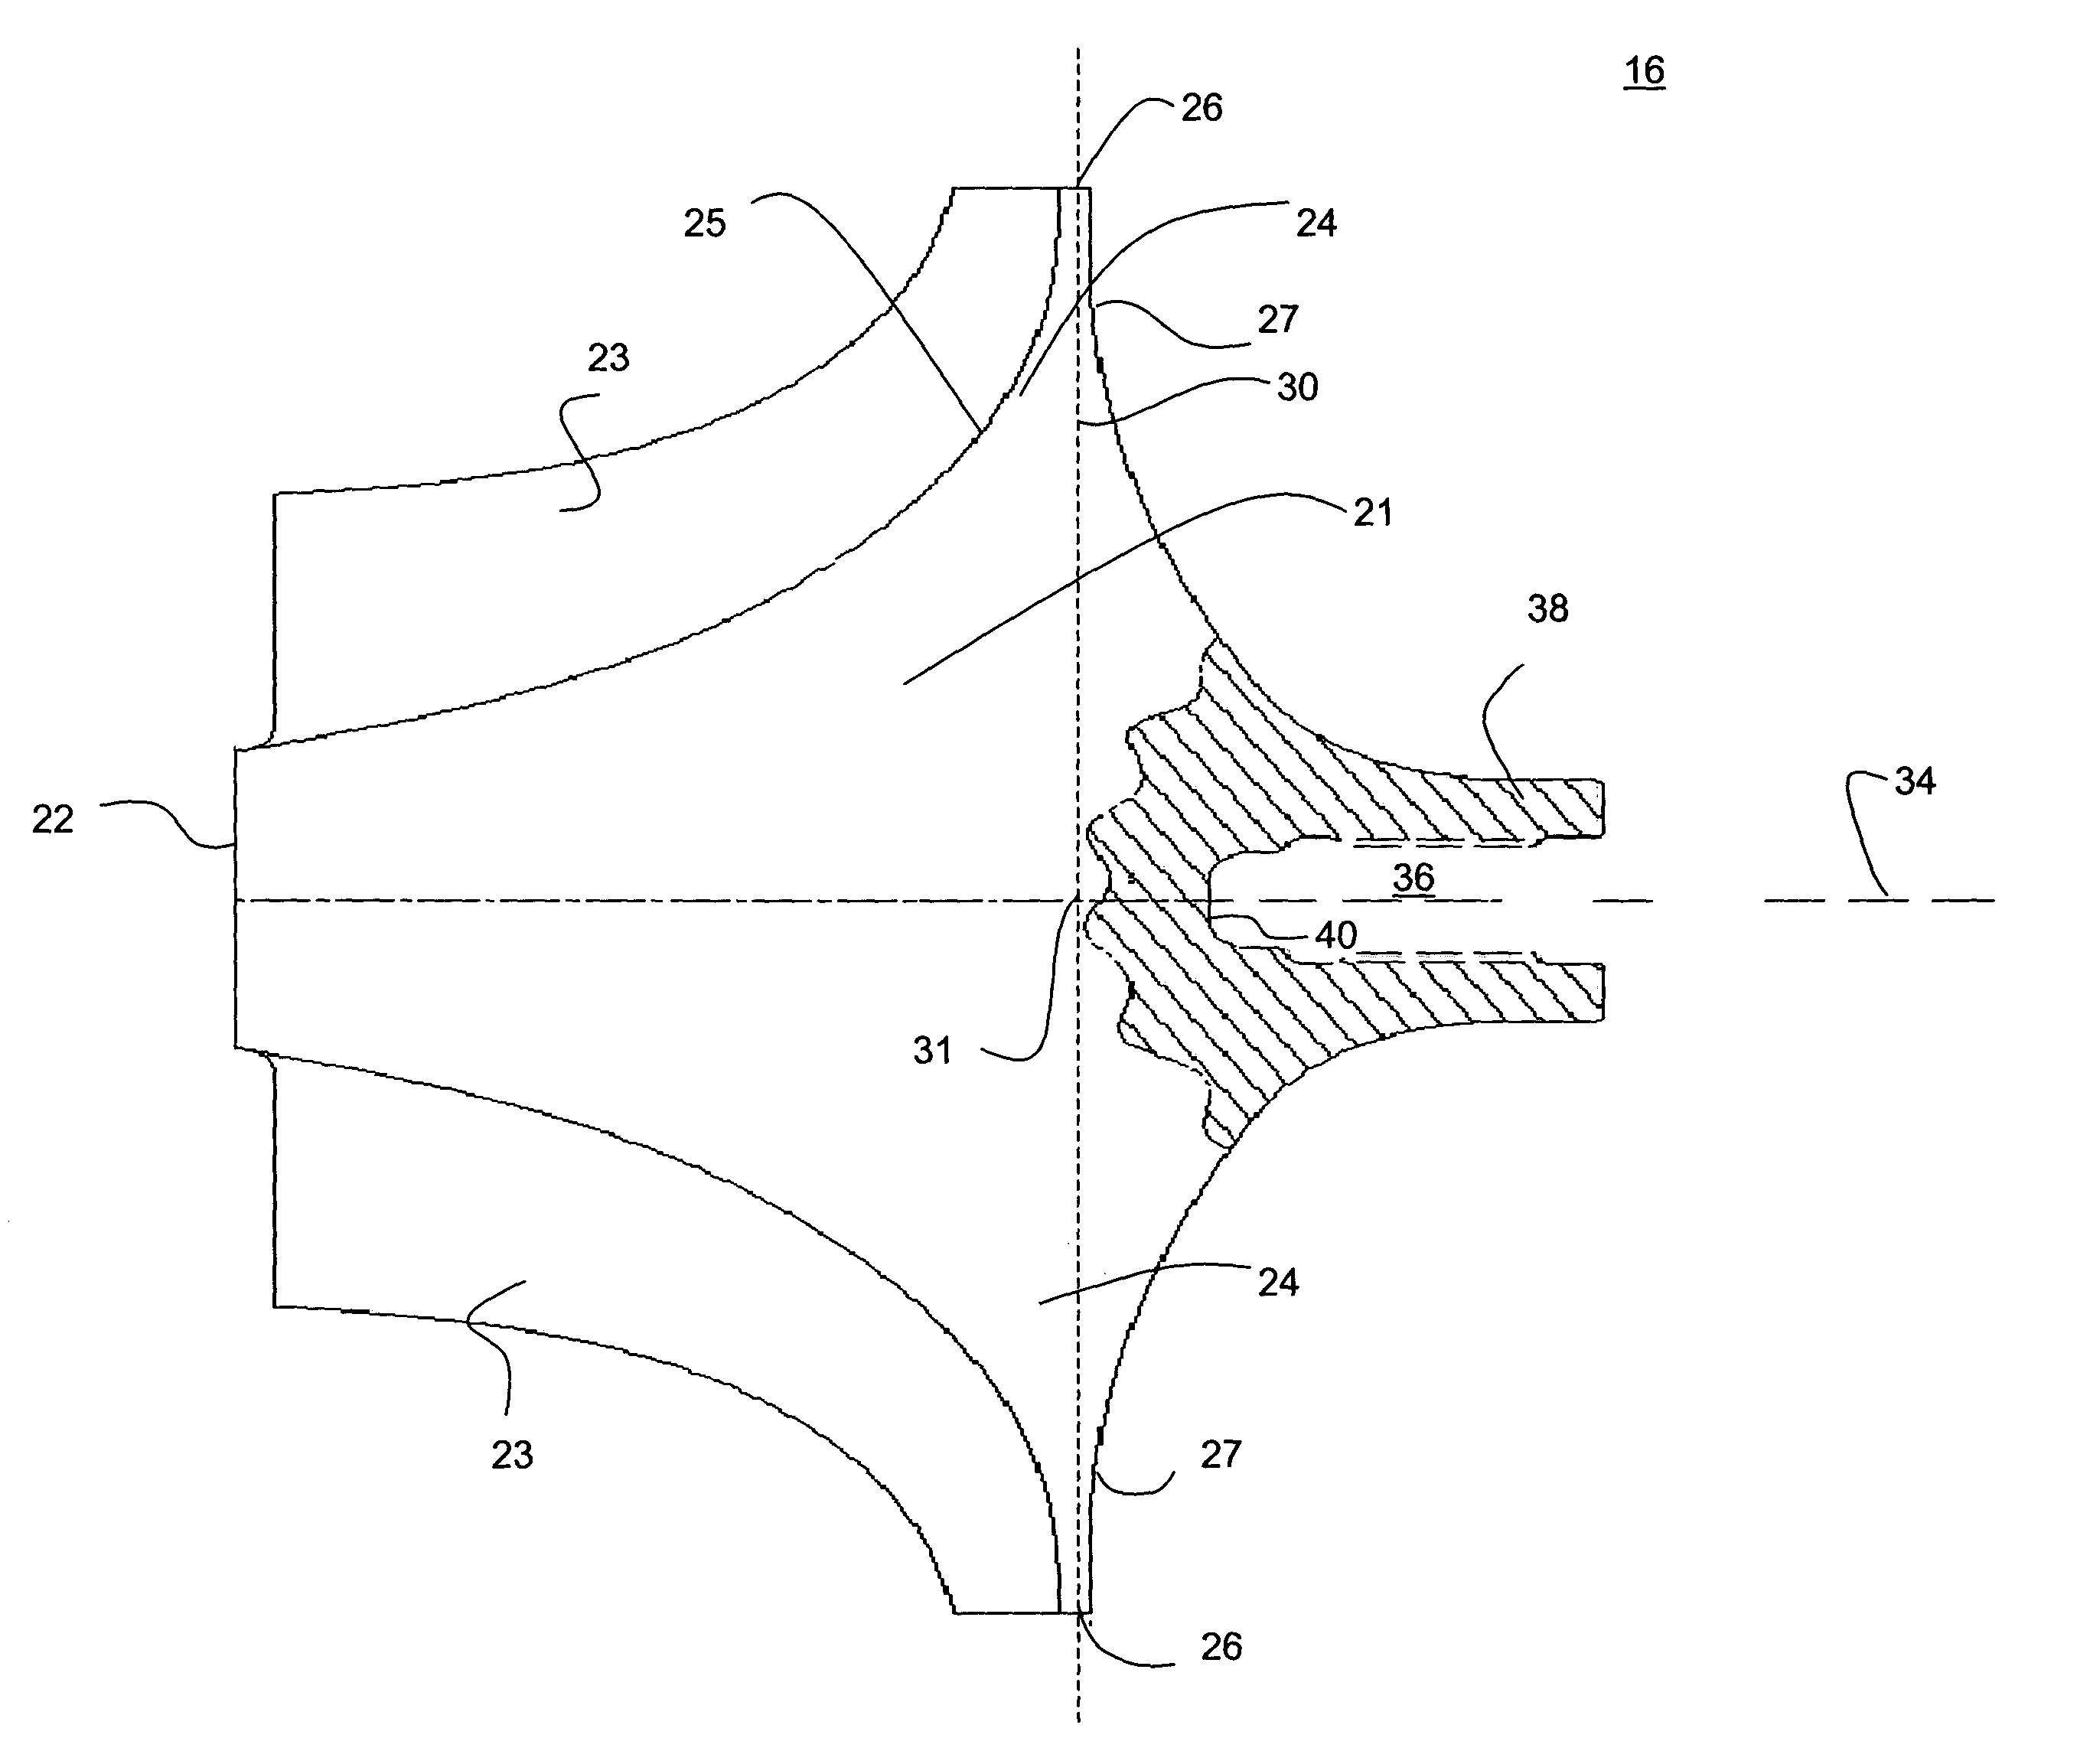 Turbocharger compressor wheel having a counterbore treated for enhanced endurance to stress-induced fatigue and configurable to provide a compact axial length